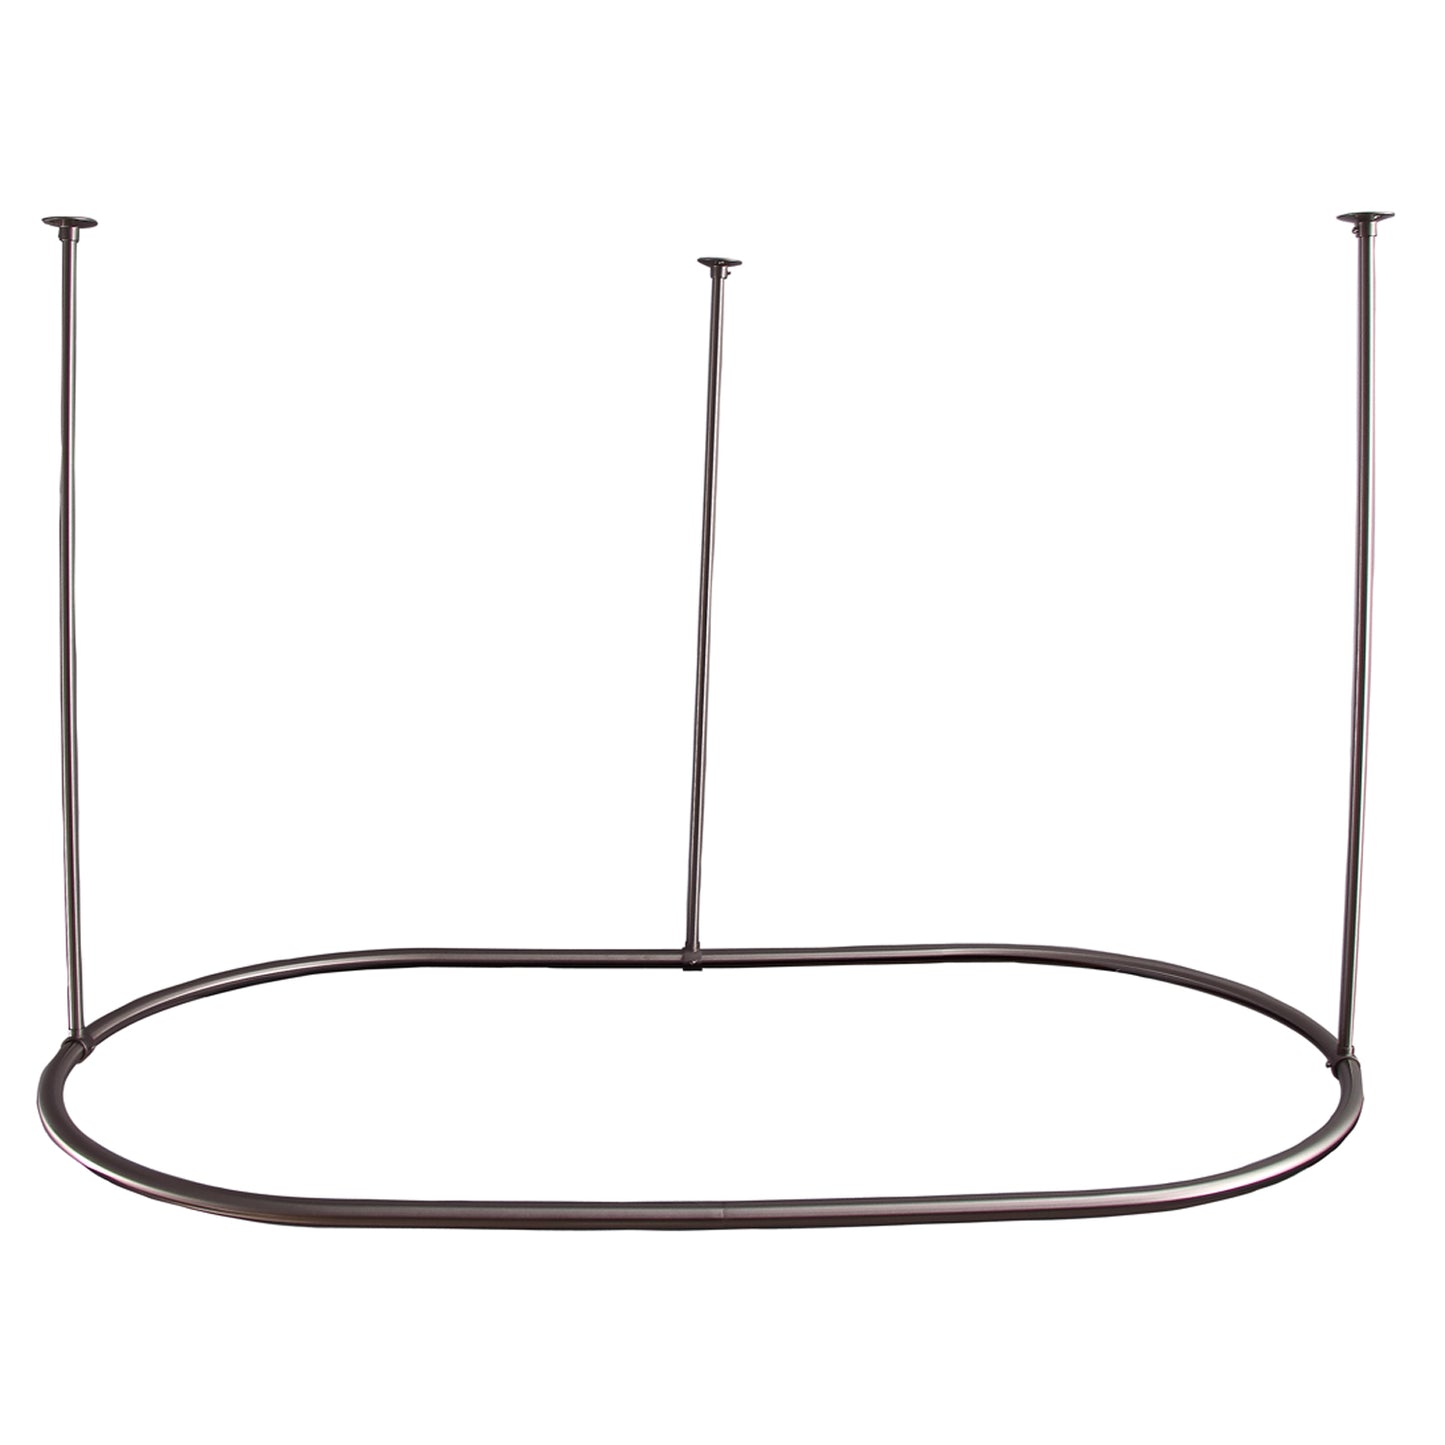 60" x 36" Oval Shower Curtain Ring in Brushed Nickel